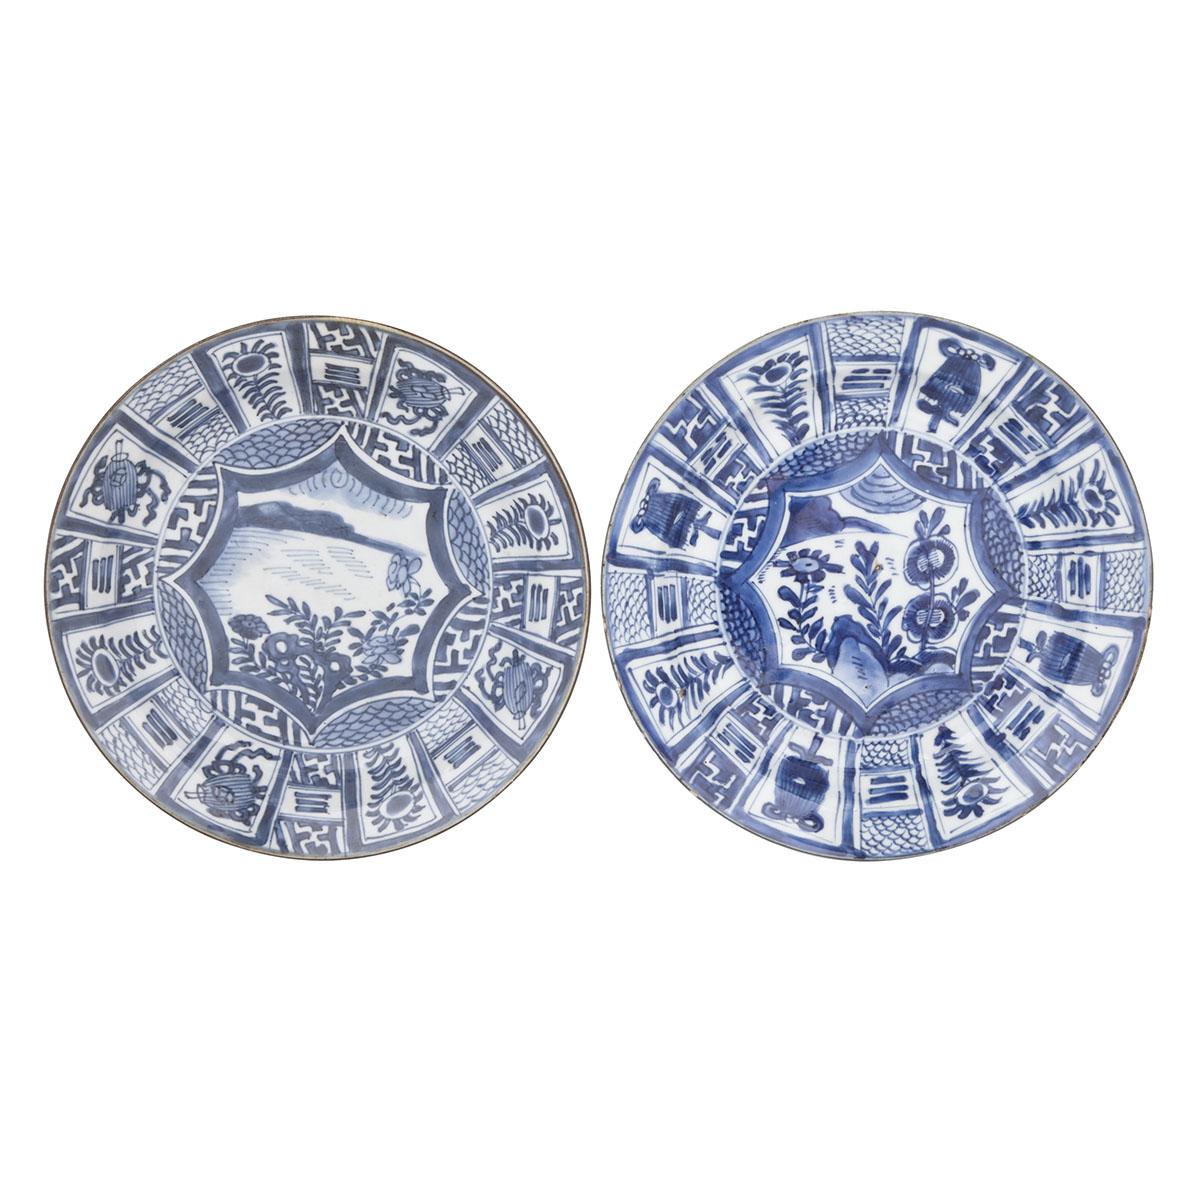 A PAIR OF BLUE AND WHITE PLATES, KANGXI MARK AND OF THE PERIOD (1662-1722) 清康熙 花押款青花盤一對 Each with